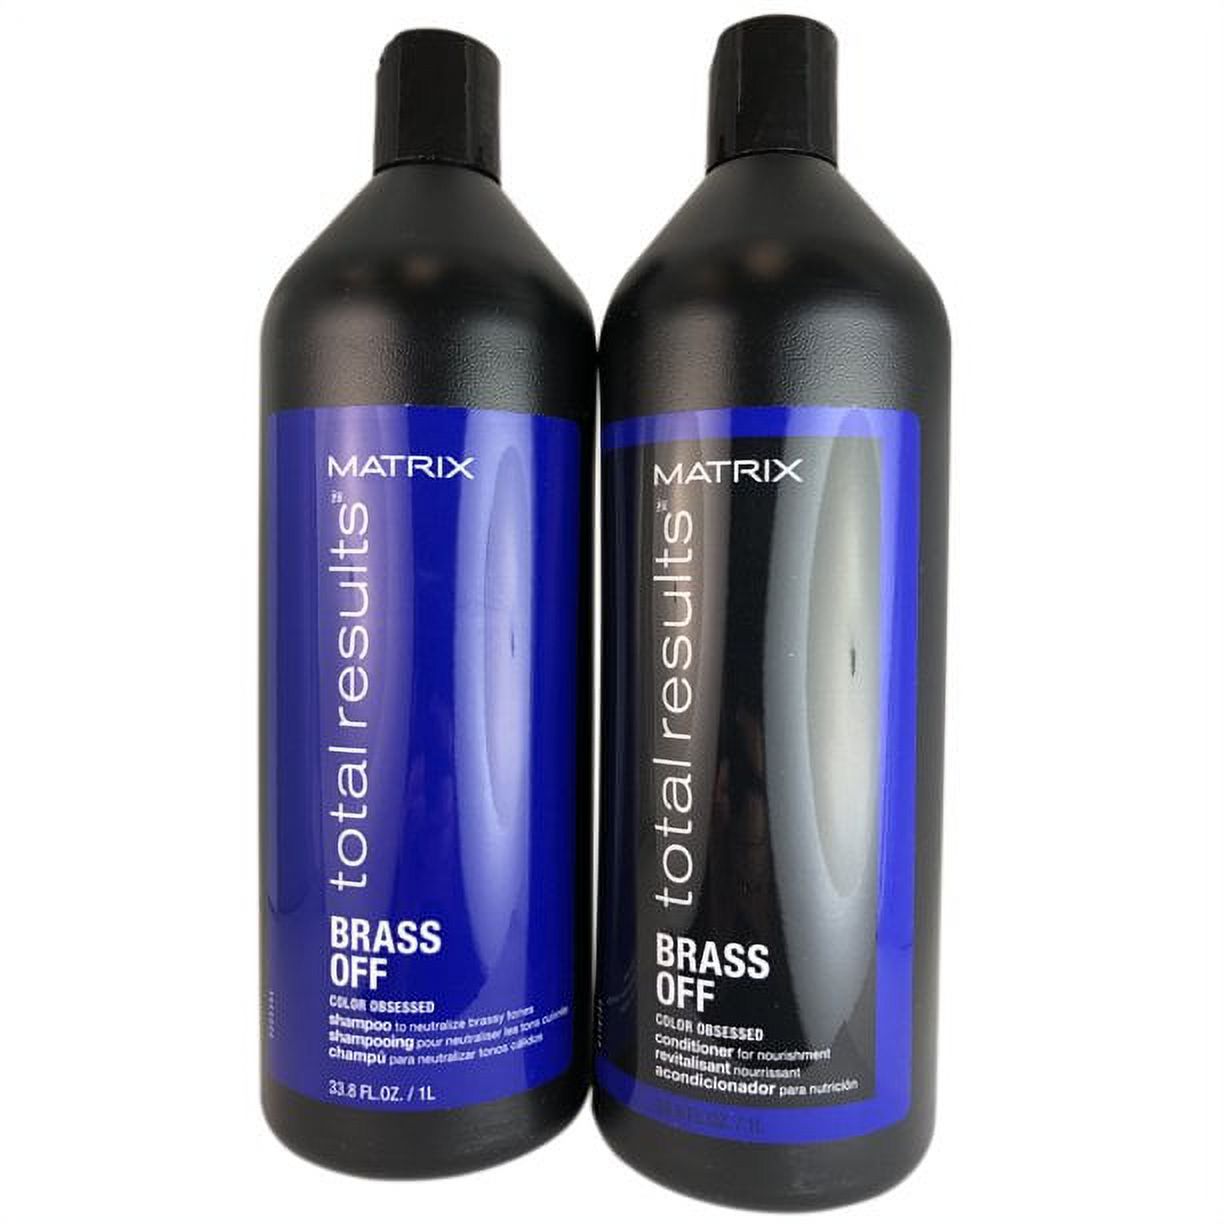 Matrix Total Results Brass Off Shampoo and Conditioner, 33.8 oz Ea - image 2 of 2